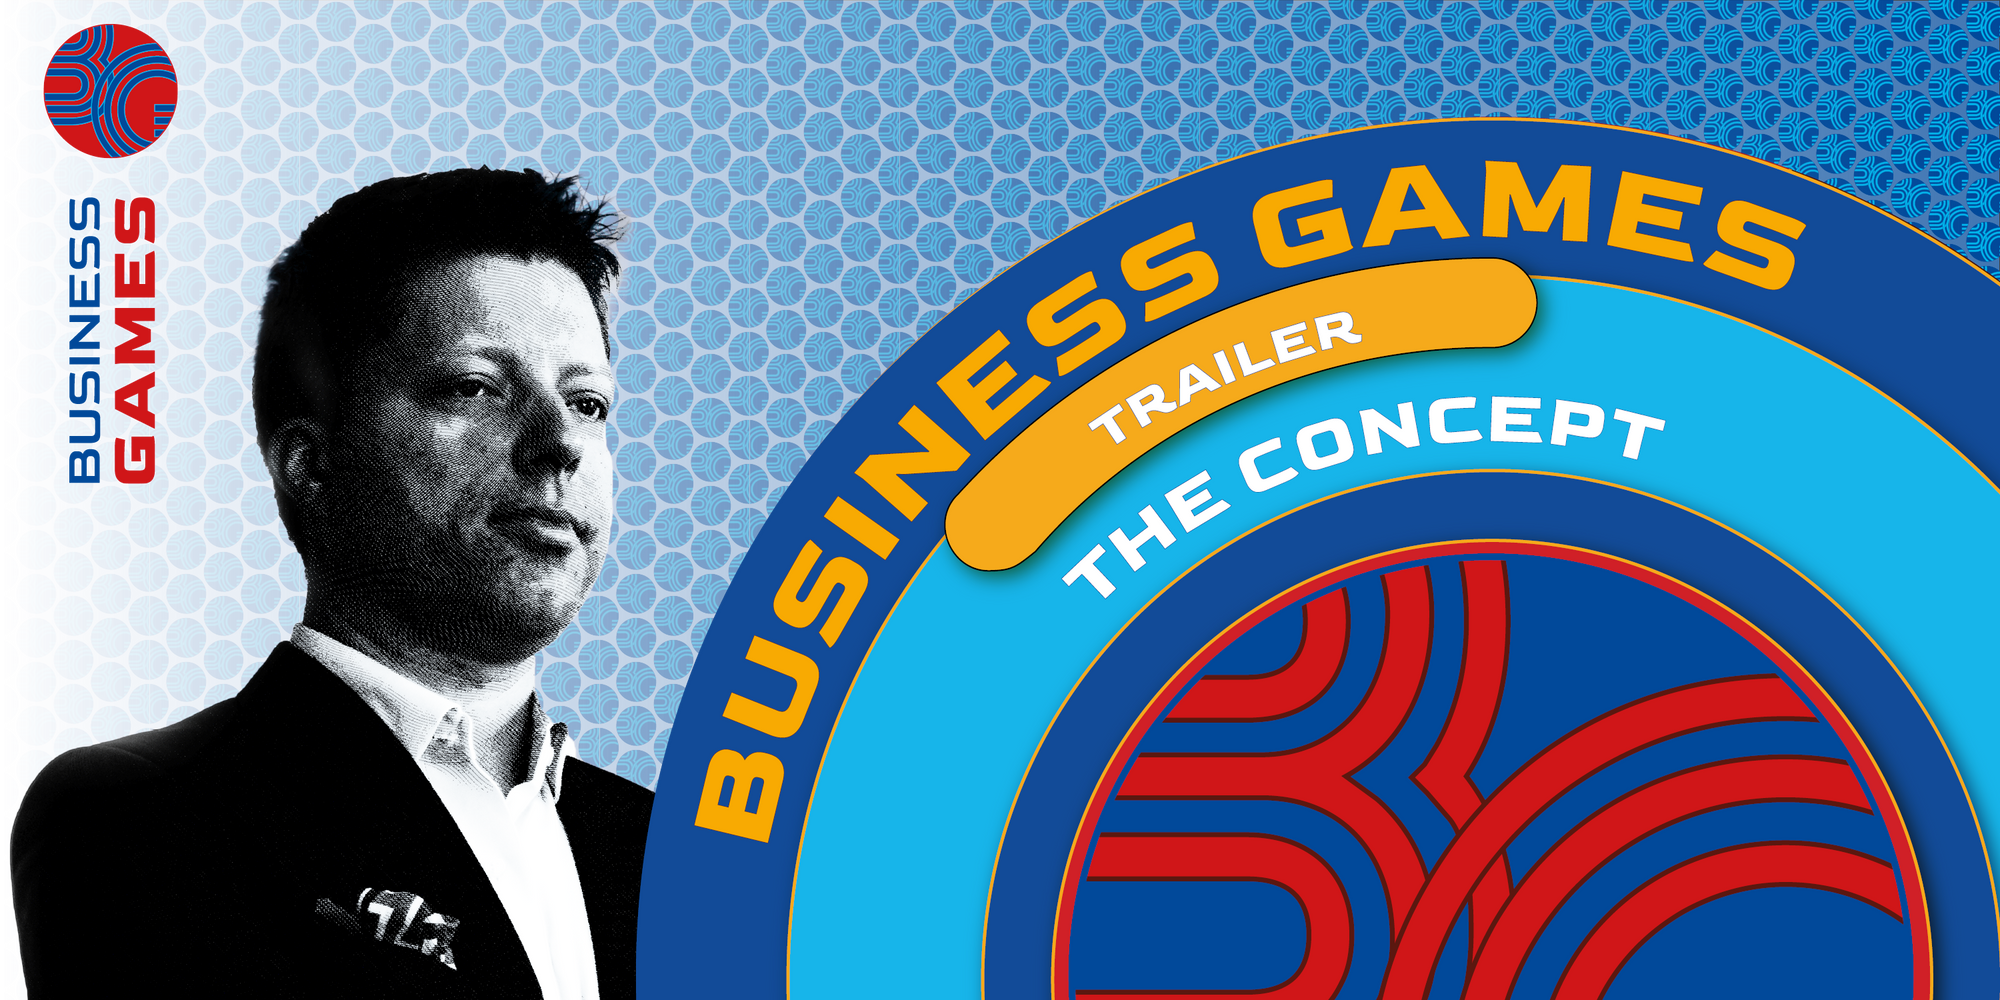 Business Games Trailer